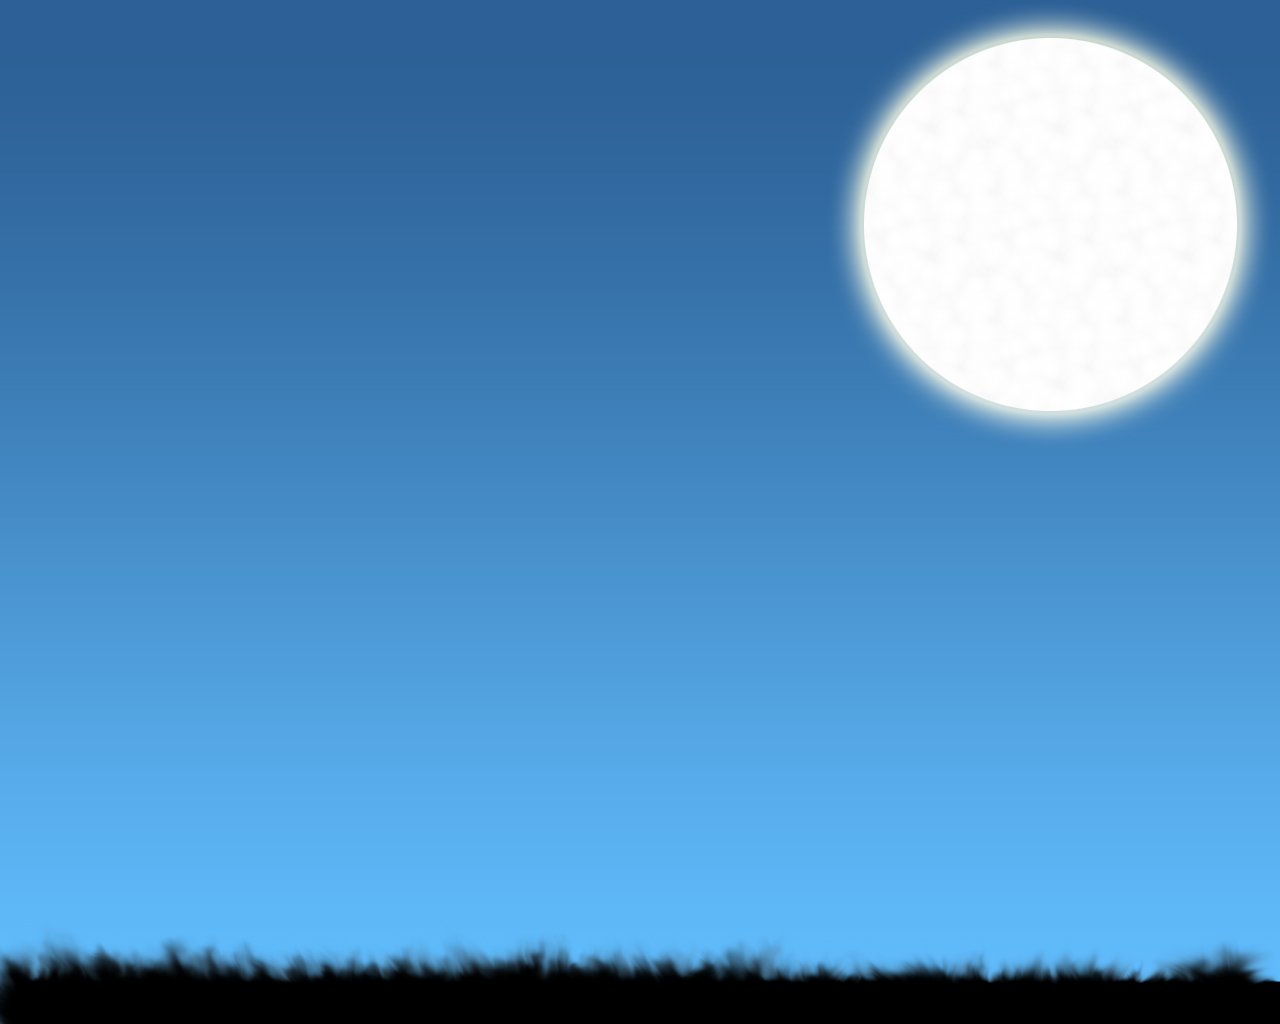 Wallpaper Includes A Full Moon Do You Miss Your Home Click To